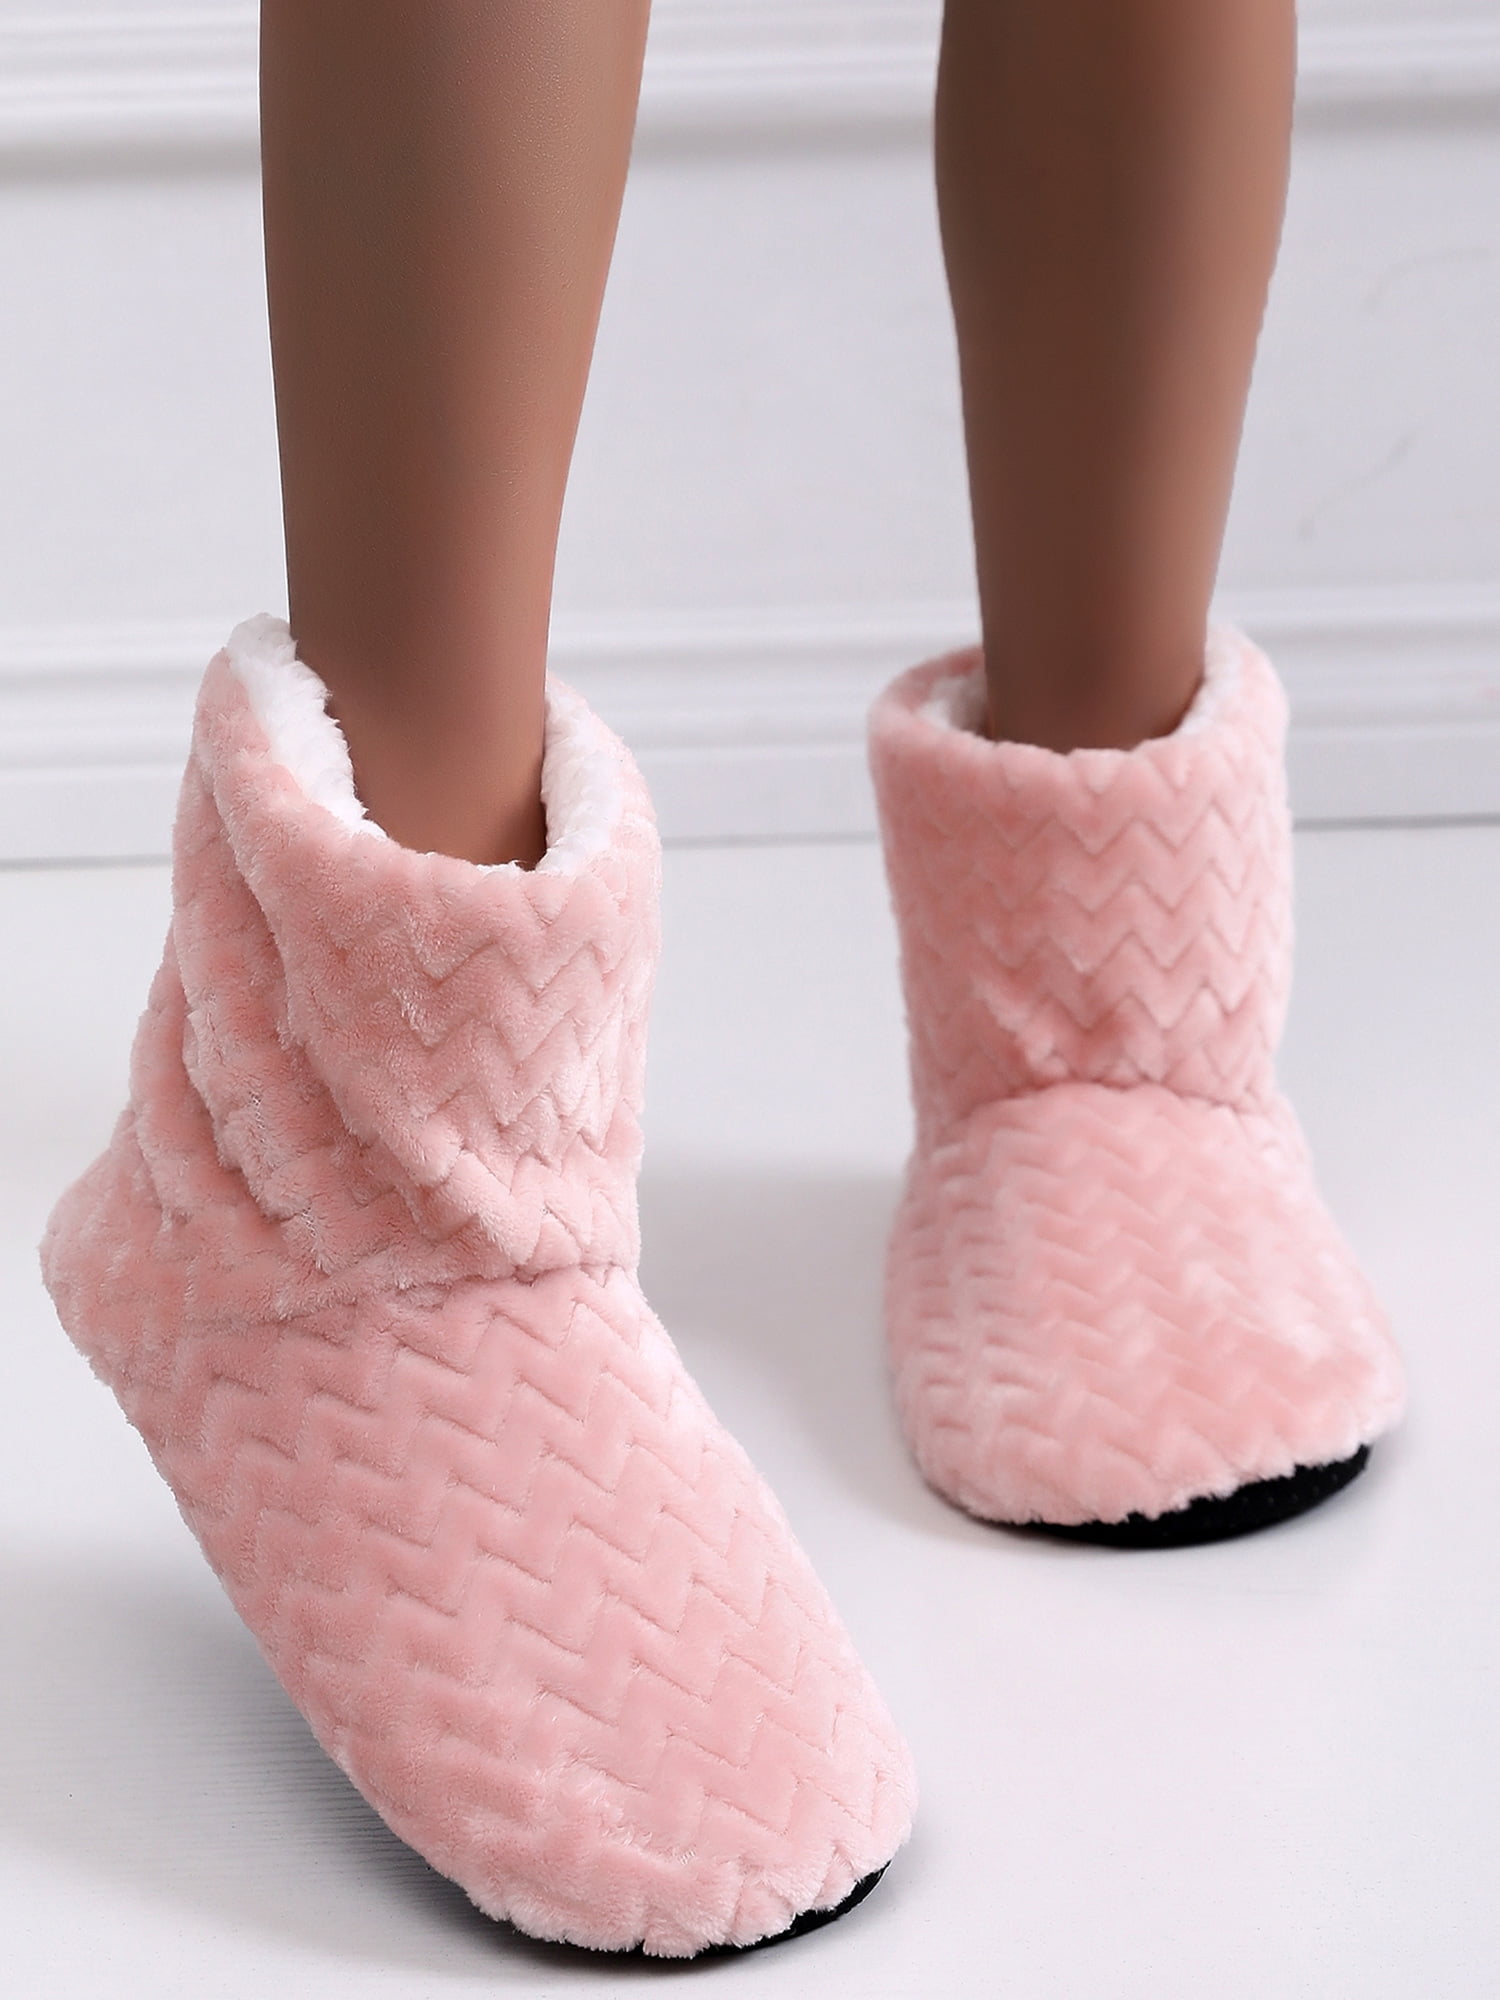 Ladies Slippers Women Girls Winter Warm Fur Ankle Boots Bootie House Shoes 